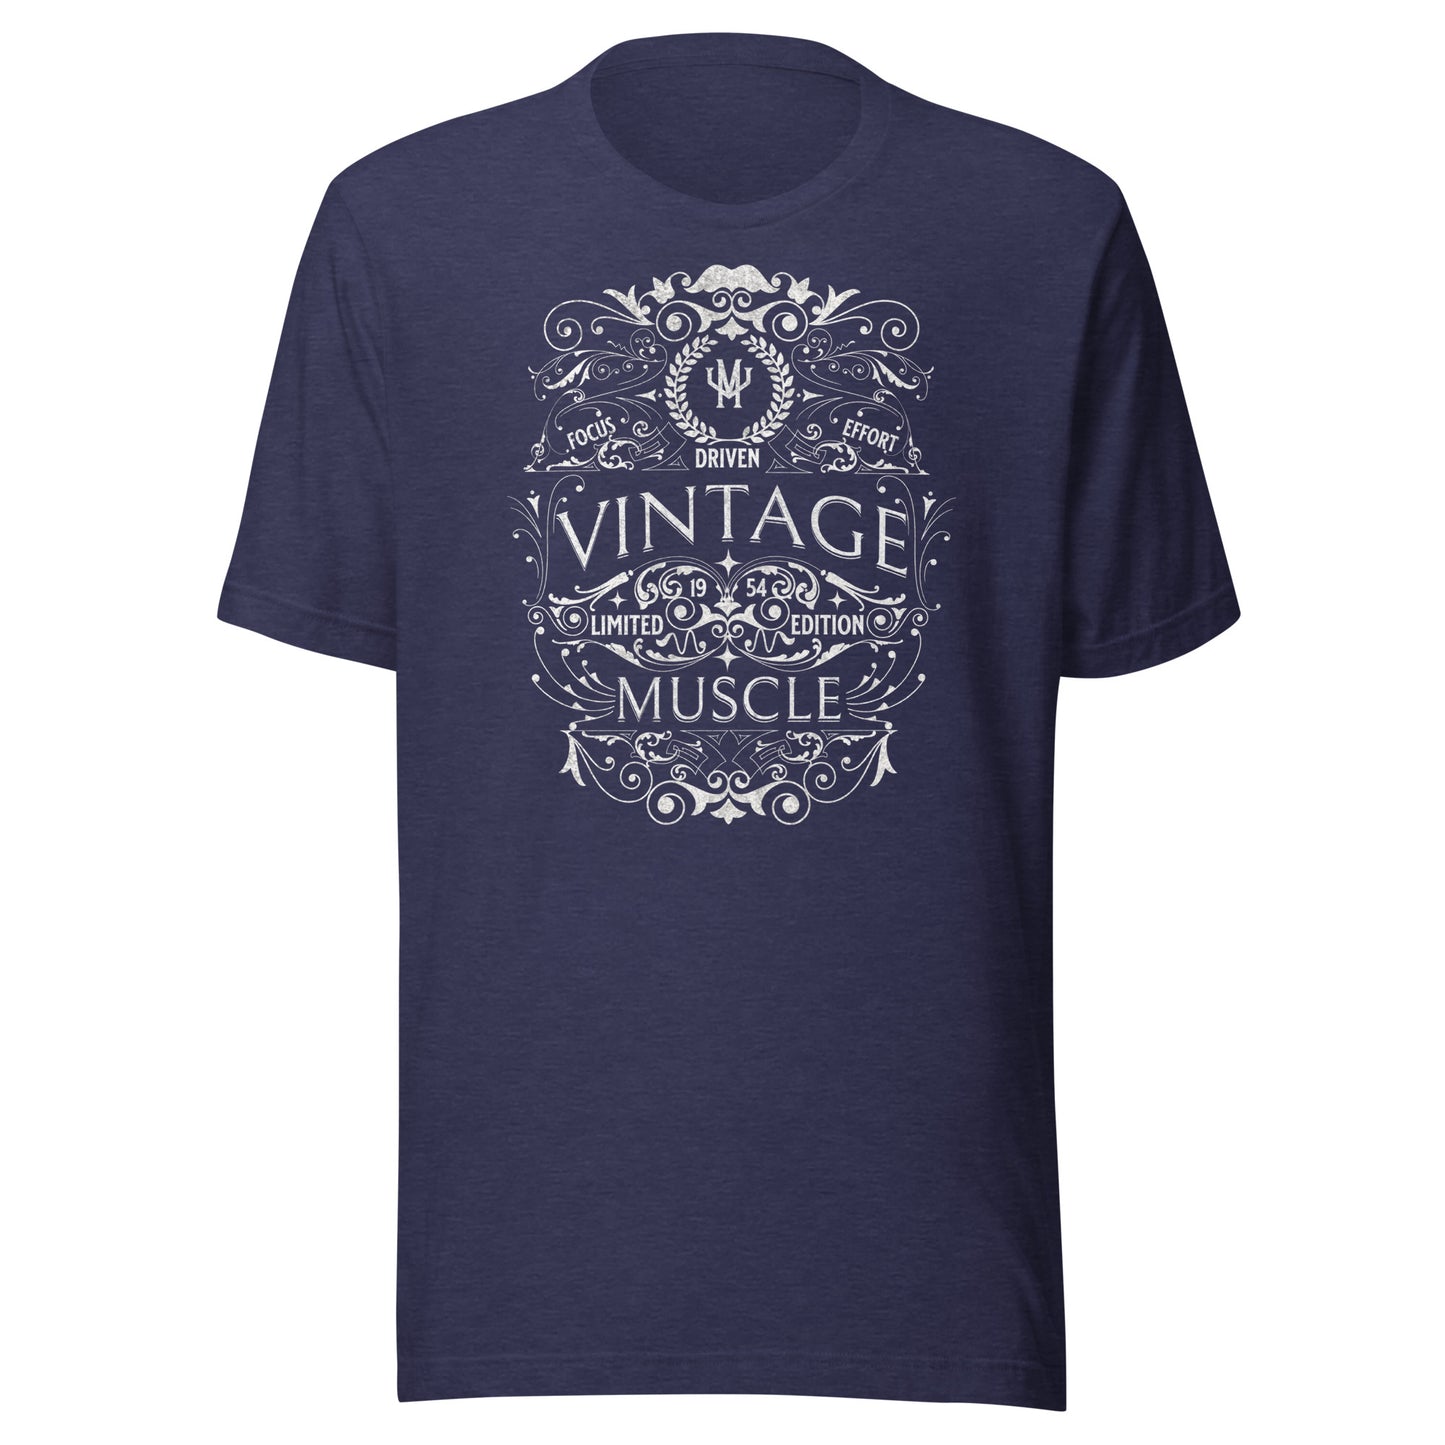 Vintage Muscle: Limited Edition Unisex T-shirt